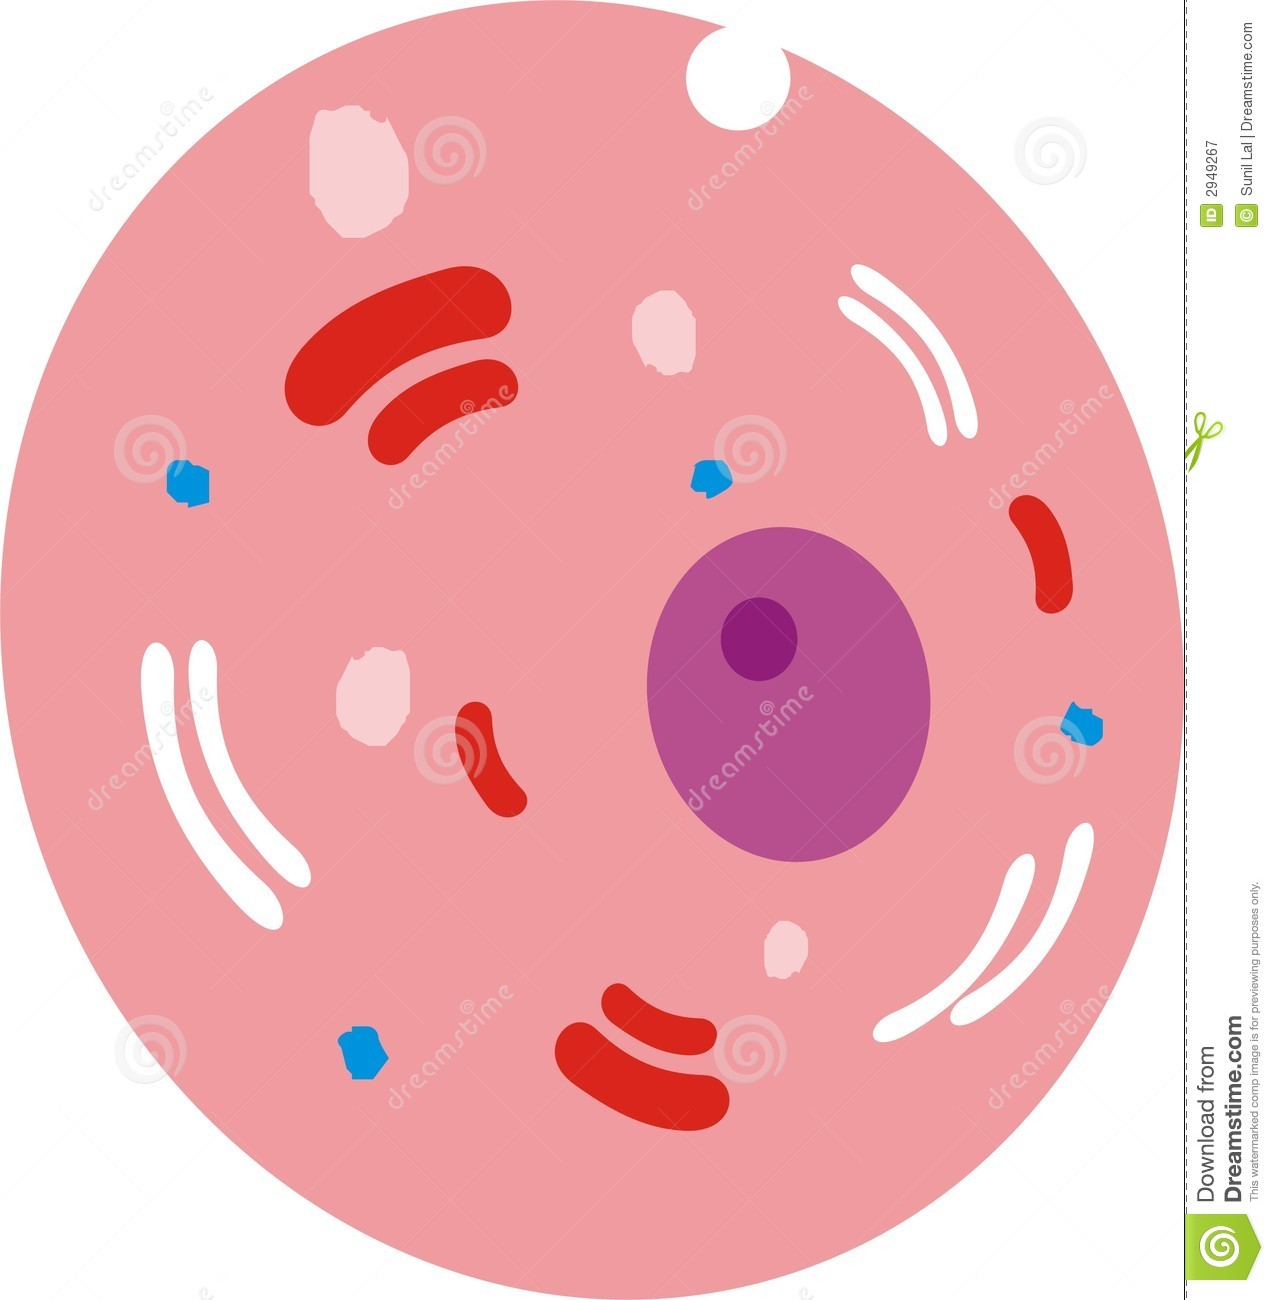 Human Cell Diagrammatical Royalty Free Stock Photography   Image